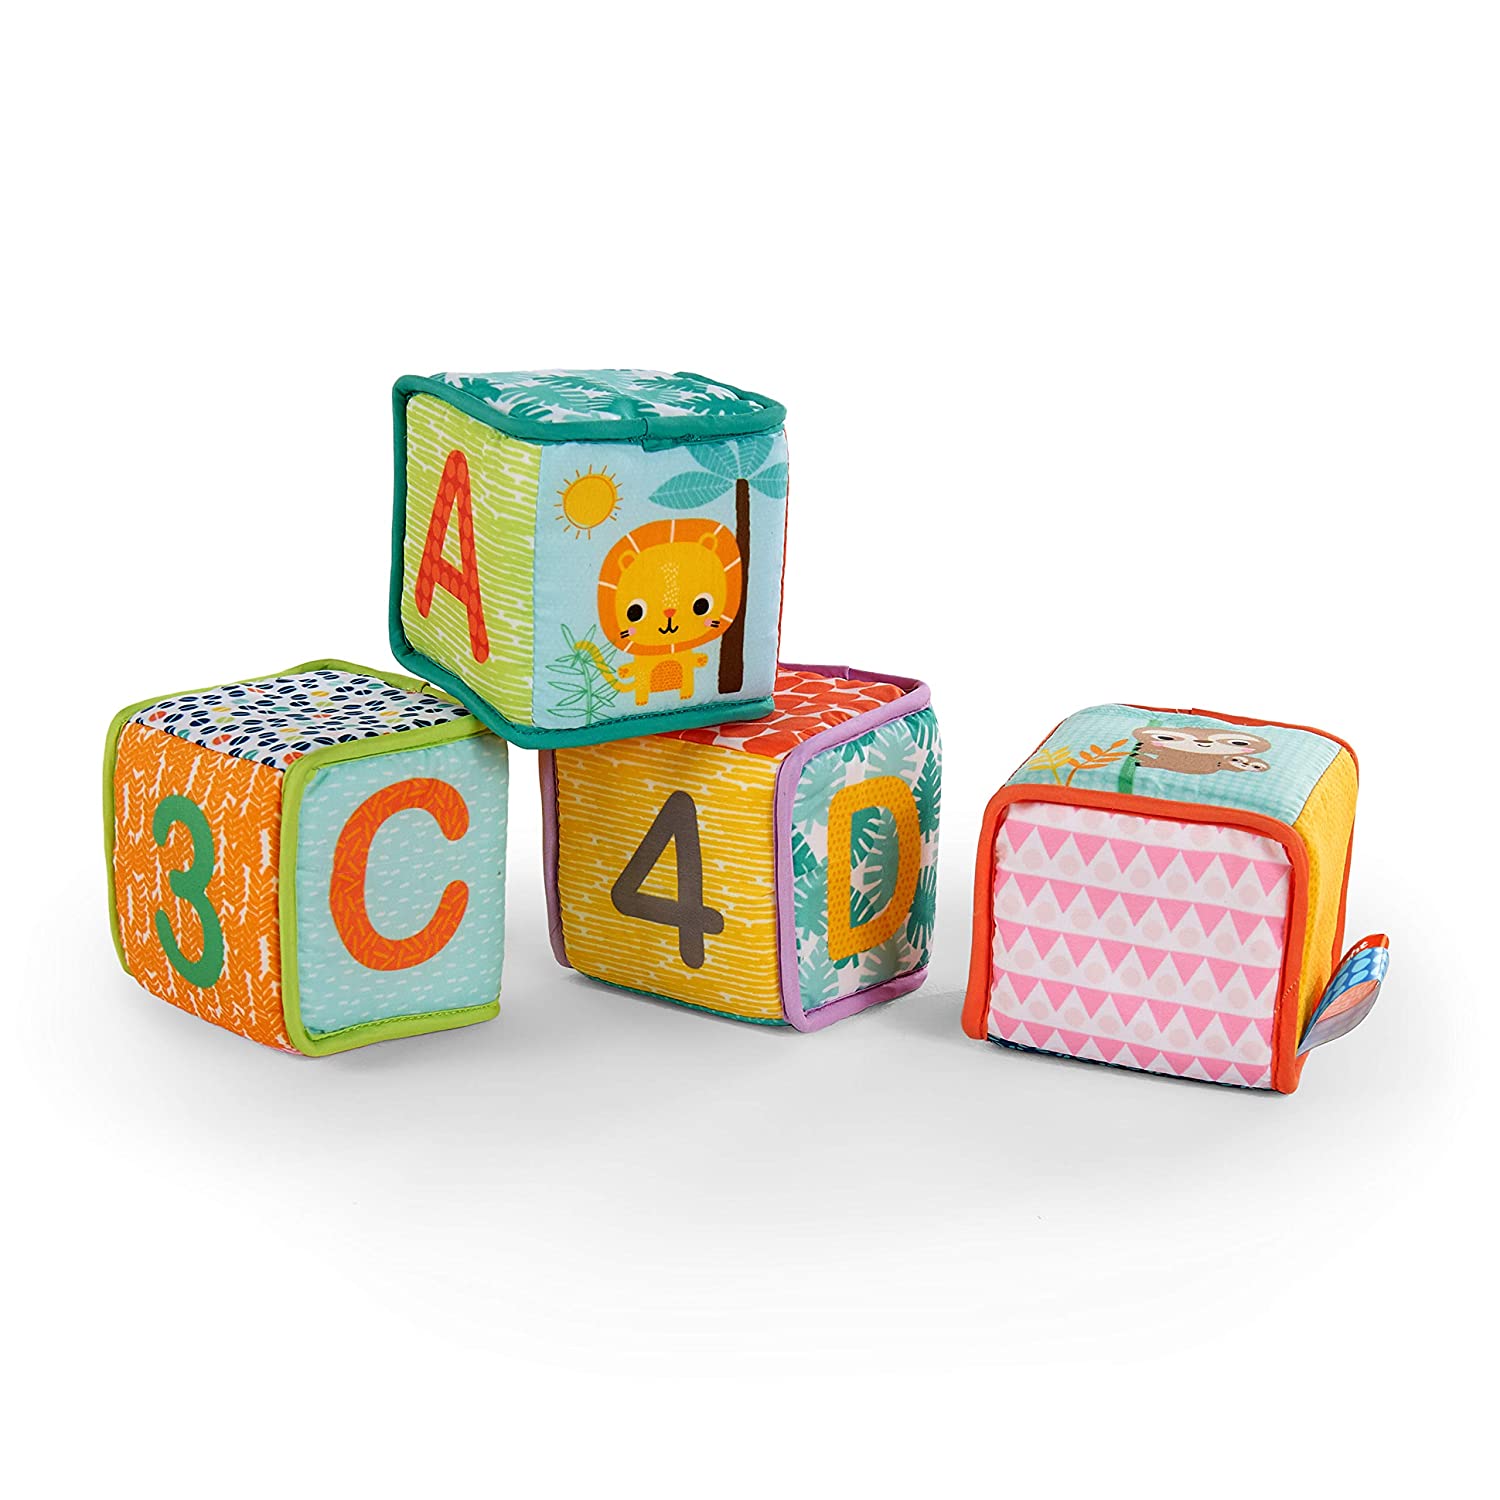 7 Best Baby Blocks 2022 - Buying Guide & Reviews 4